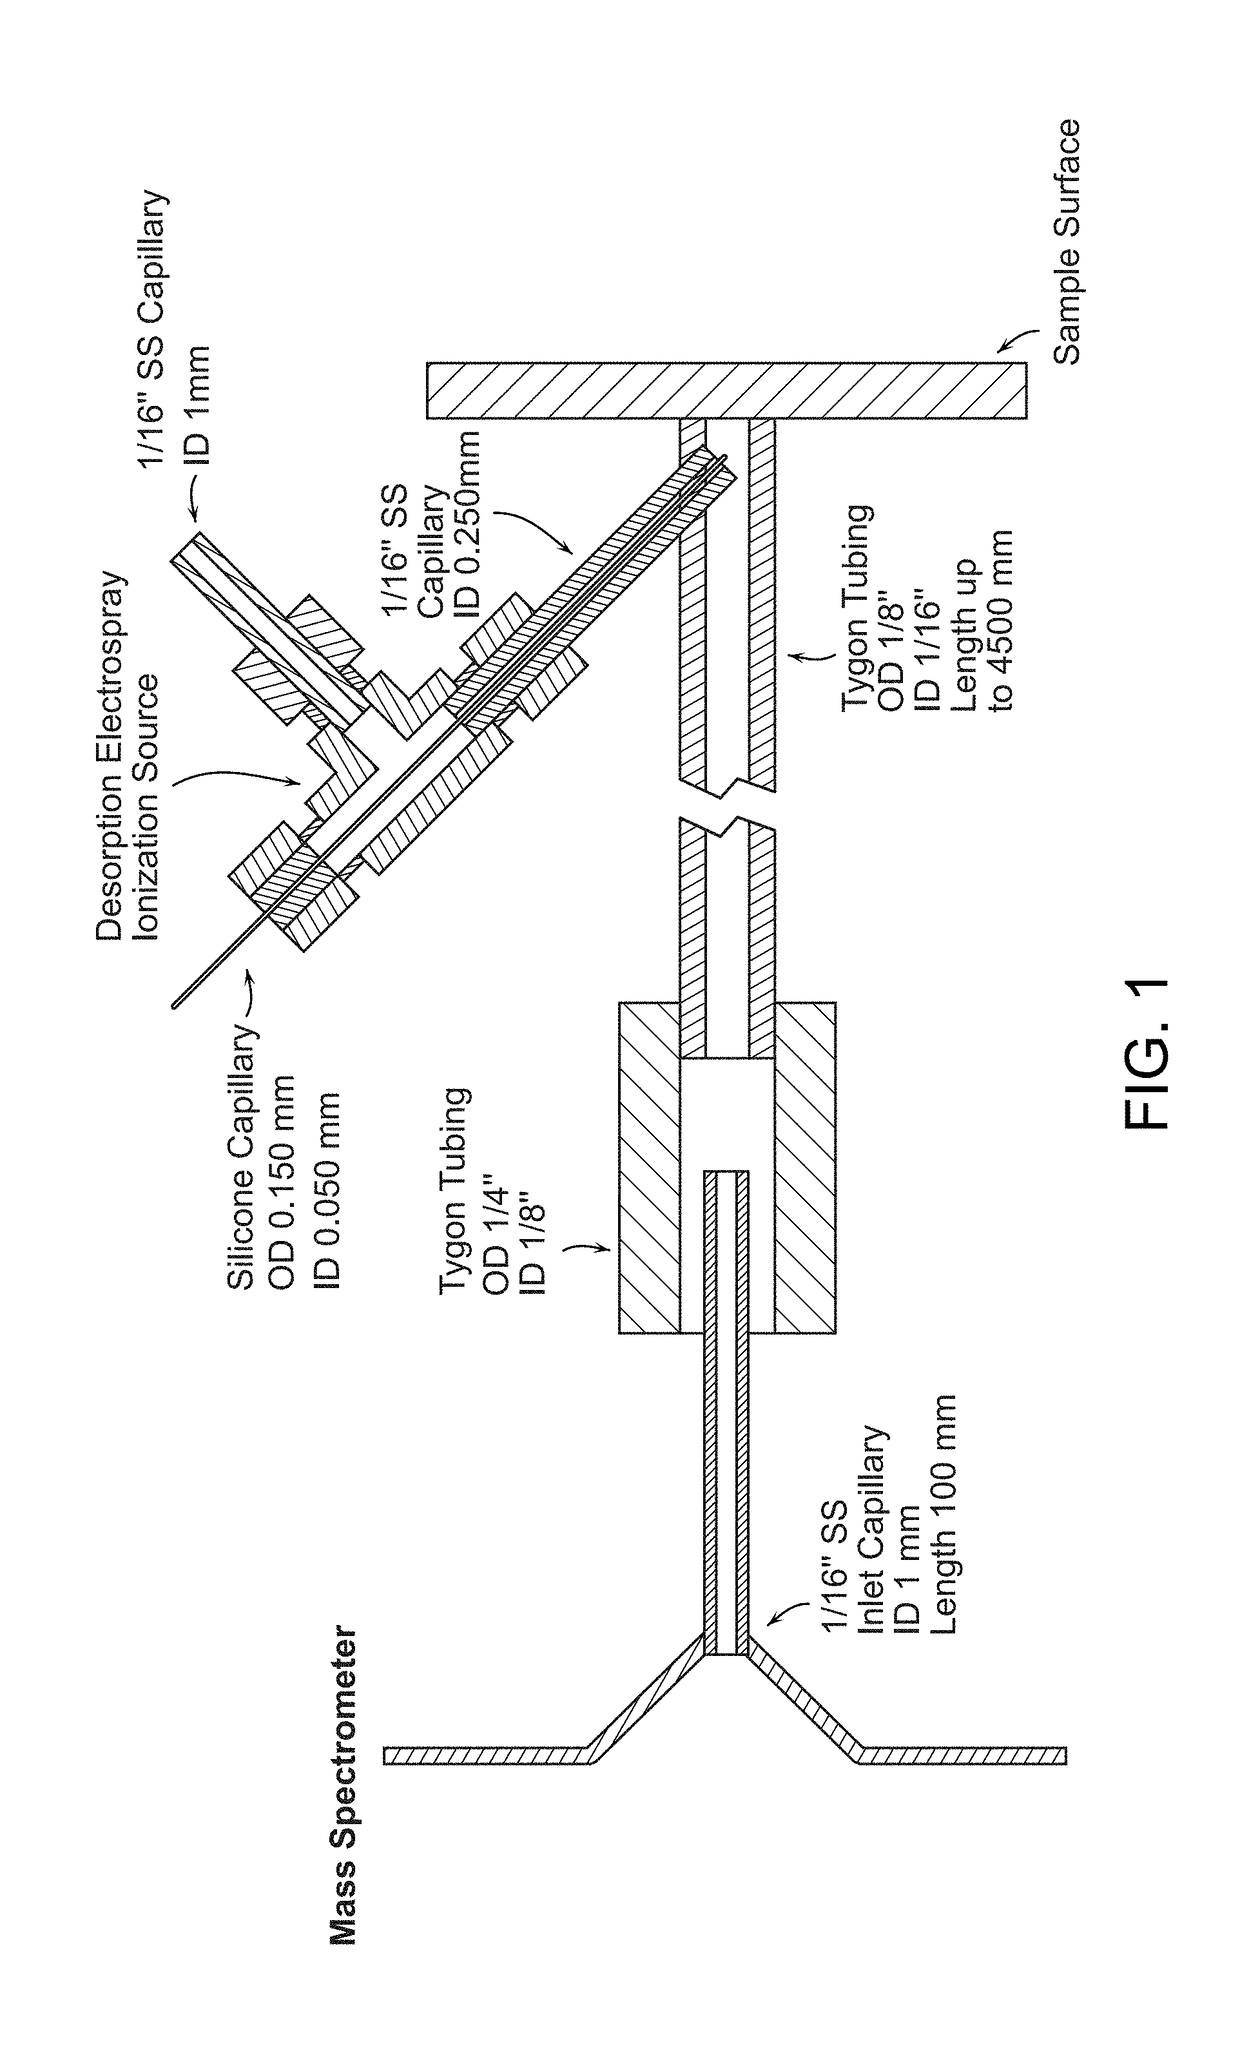 Enclosed desorption electrospray ionization probes and method of use thereof